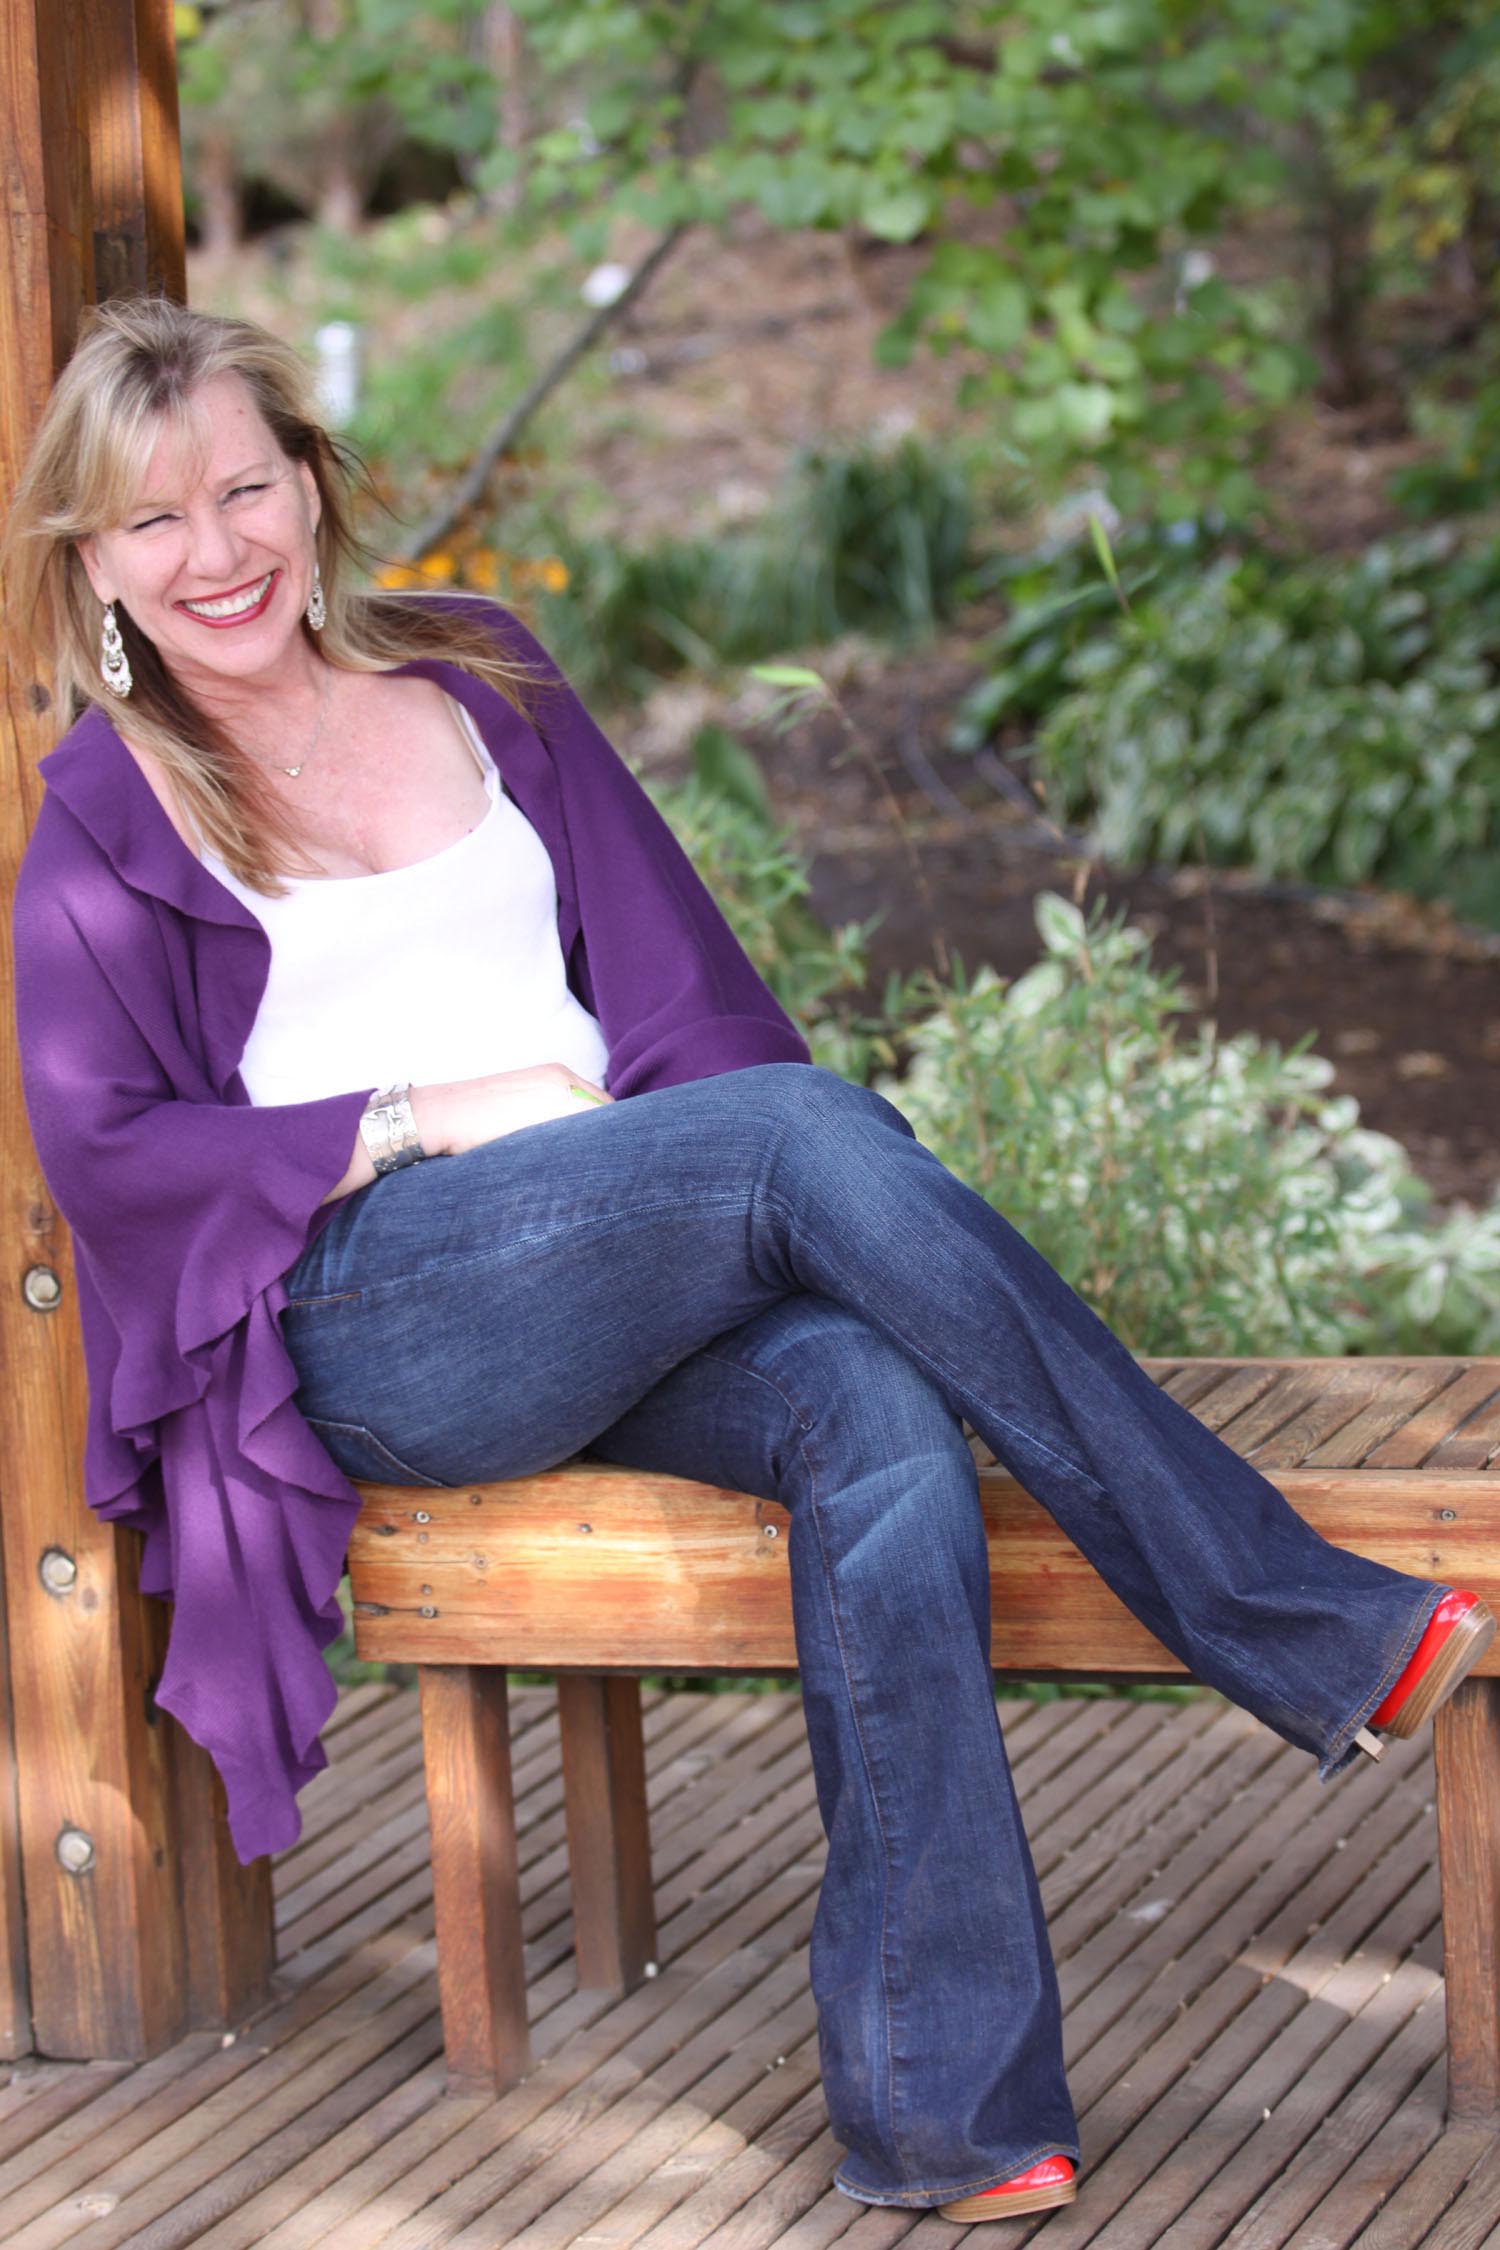 a white woman sits on a bench with legs crossed and smiling widely